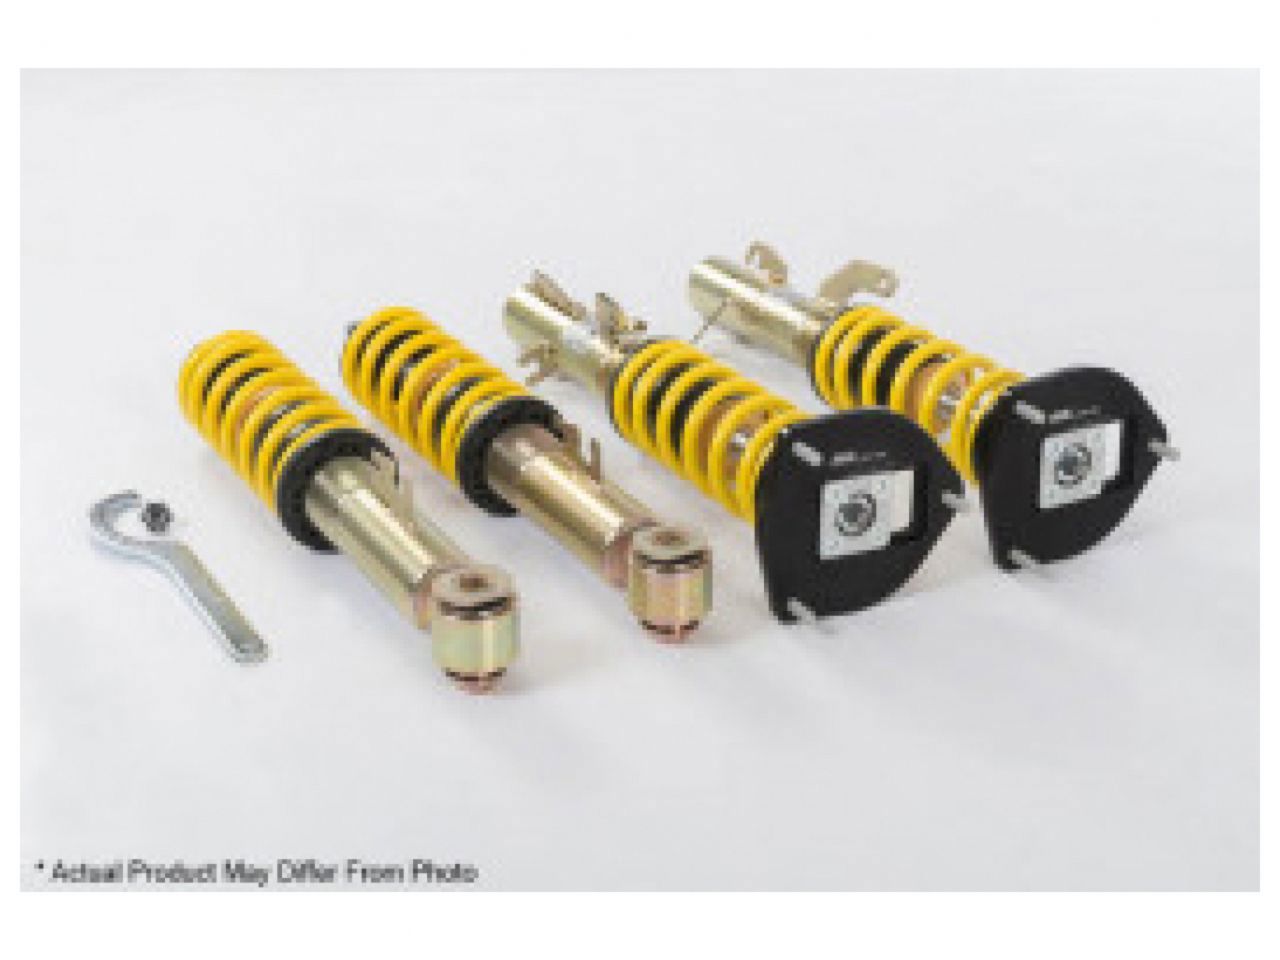 ST Suspensions Coilover Kits 18265817 Item Image